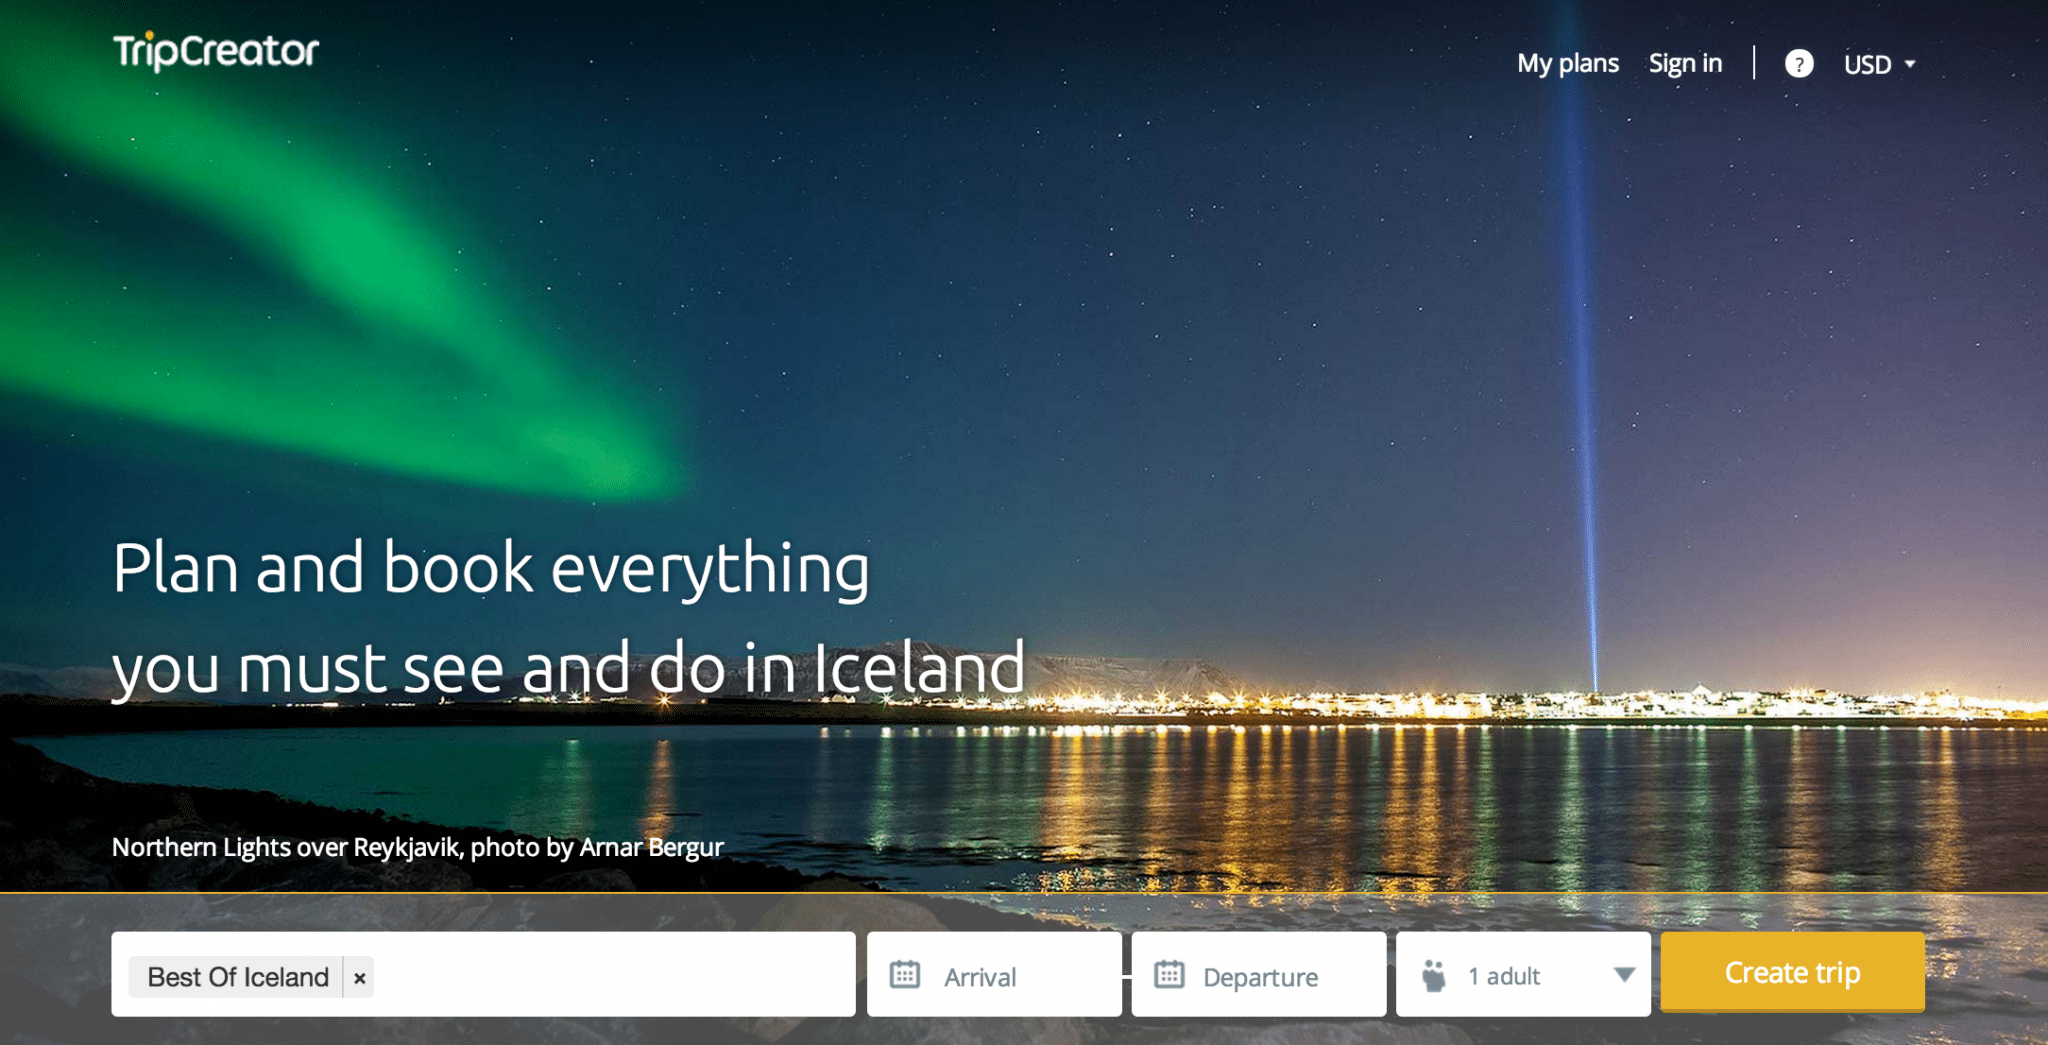 TripCreator helps you plan travel in Iceland.